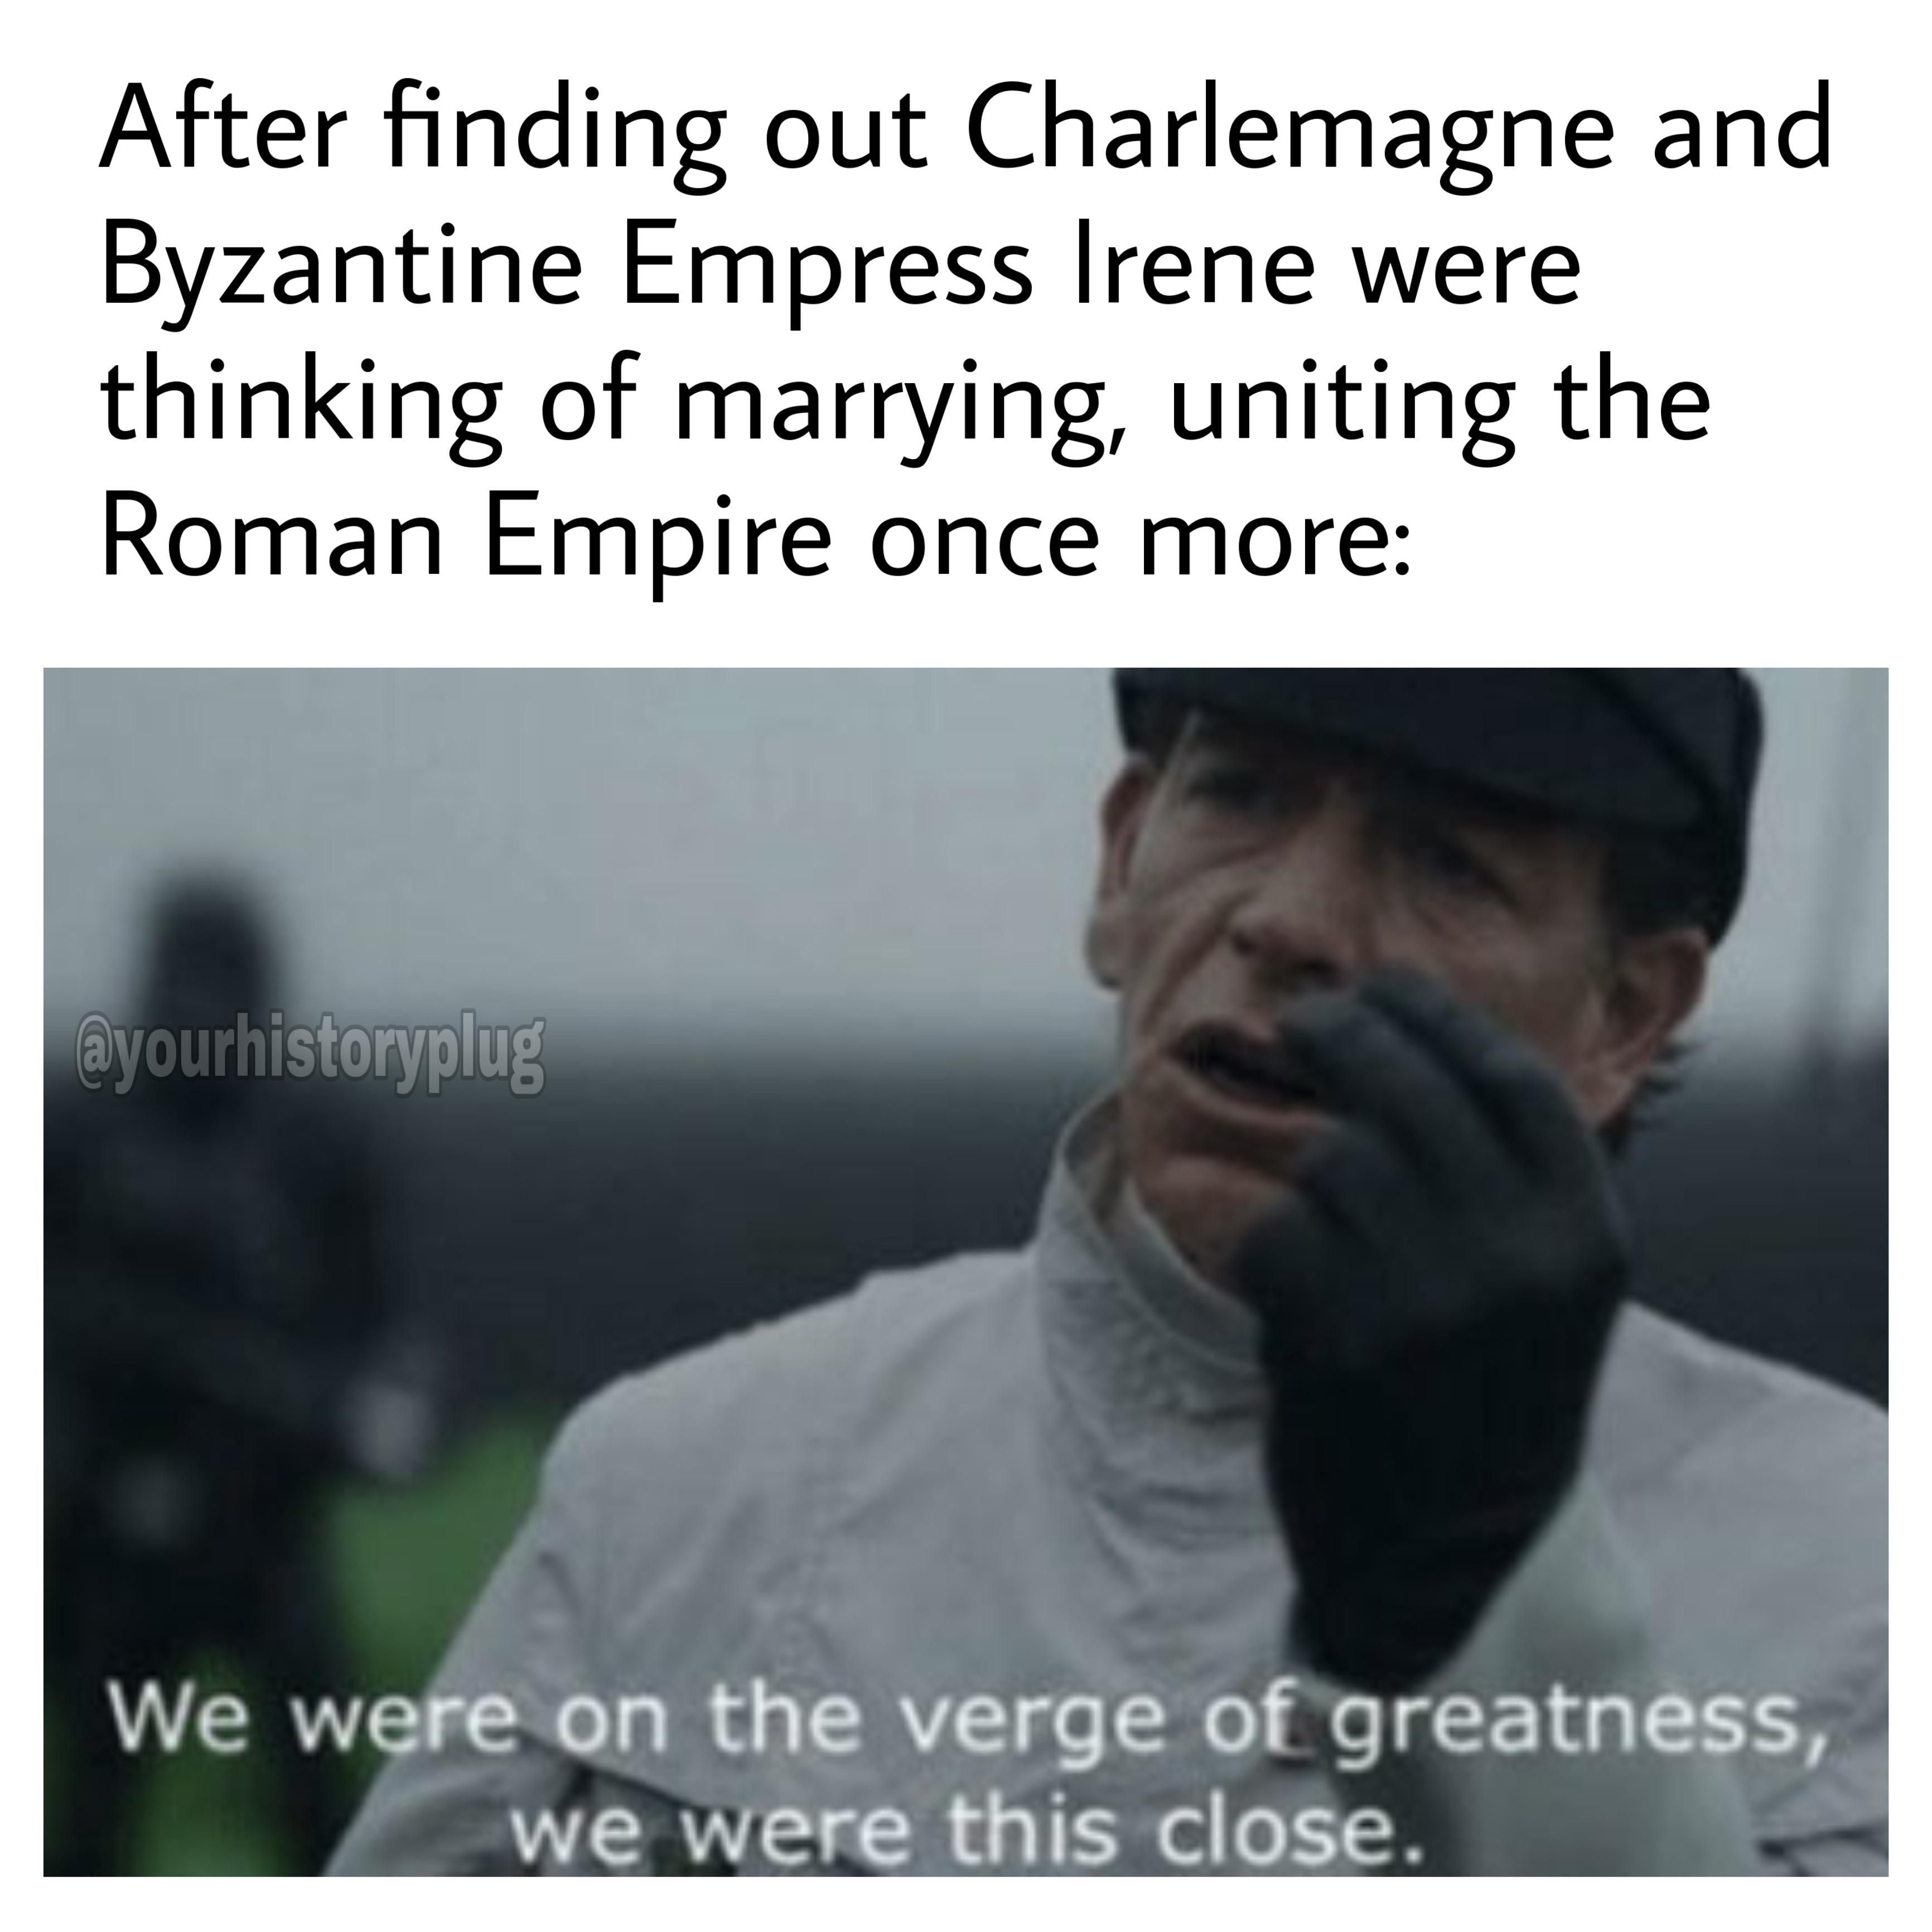 Probably would have made Charlemagne too powerful